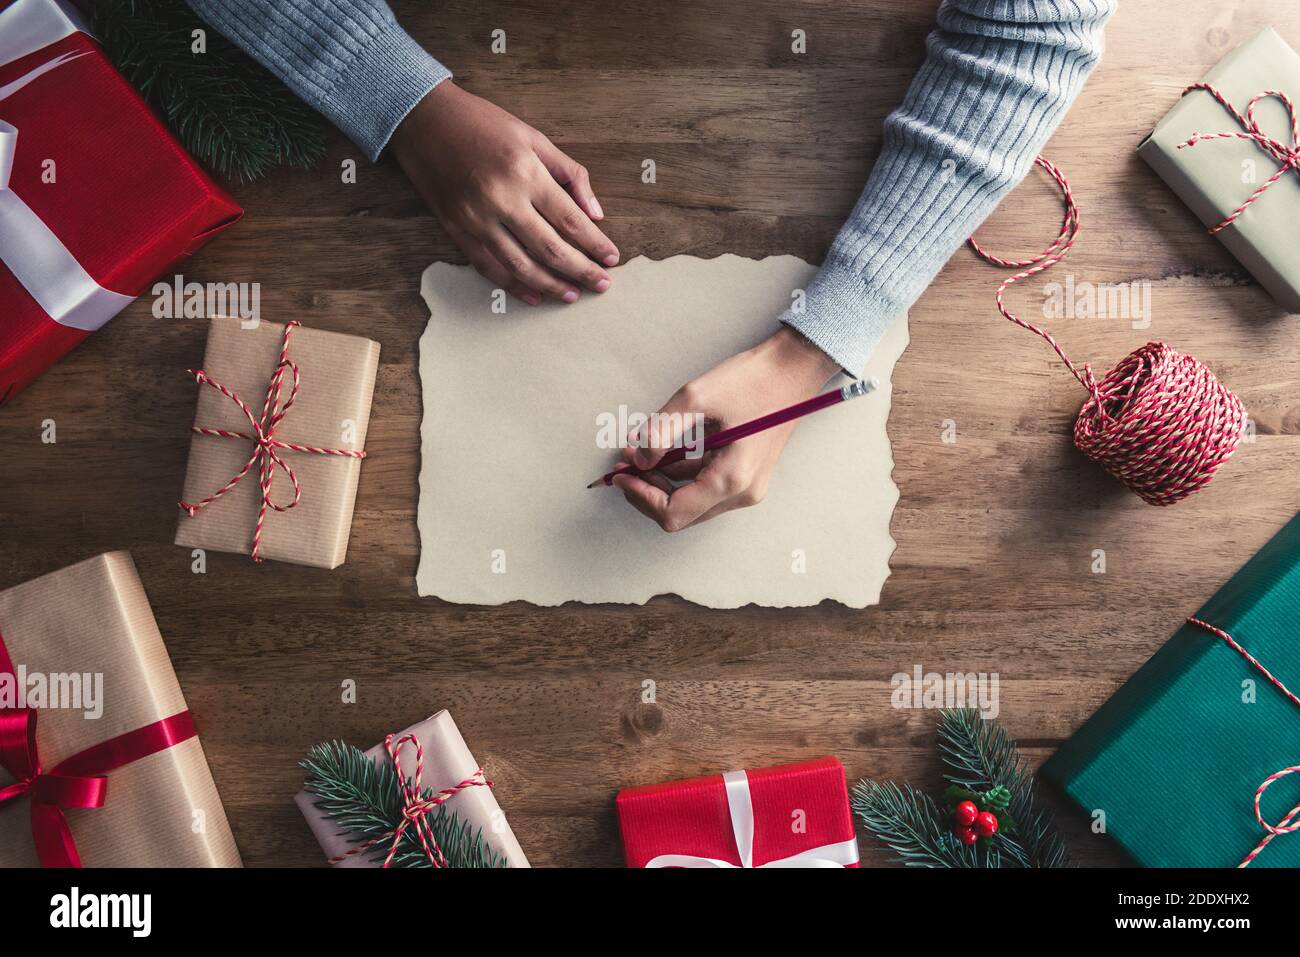 Woman in a gray sweater writing on craft paper with a red pencil in the center of christmas gifts on a wooden table Stock Photo